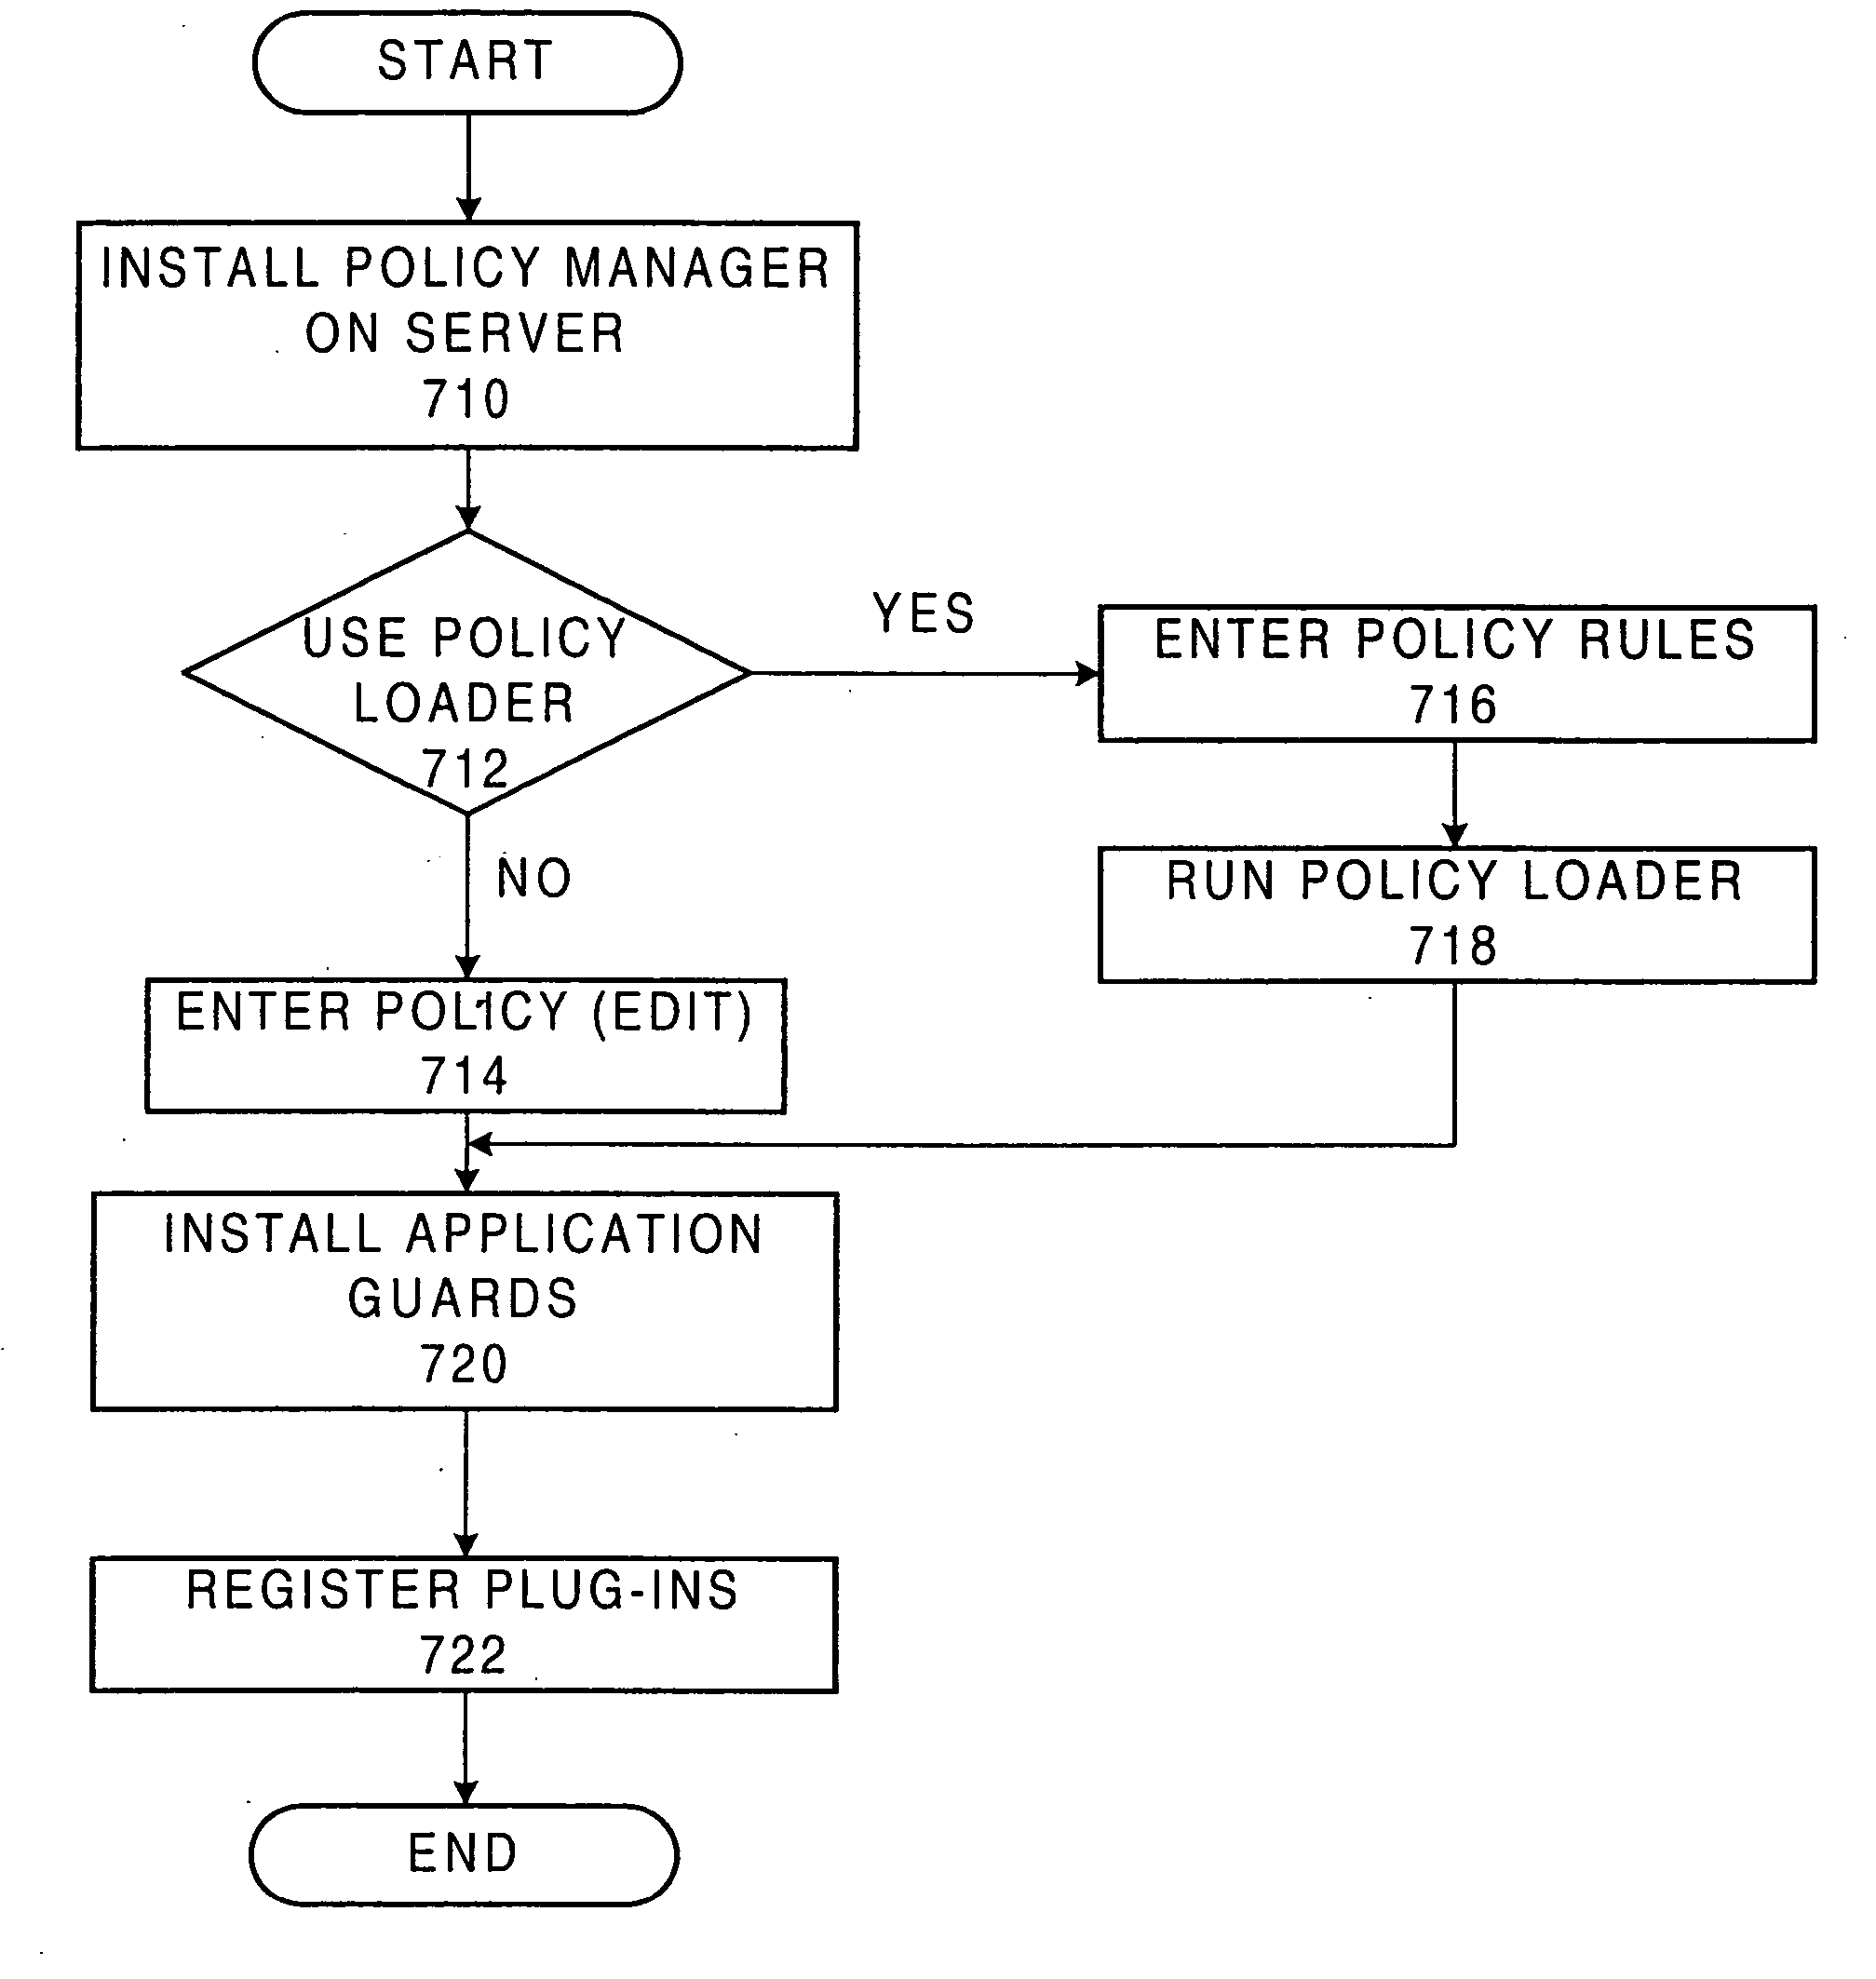 System and method for maintaining security in a distributed computer network